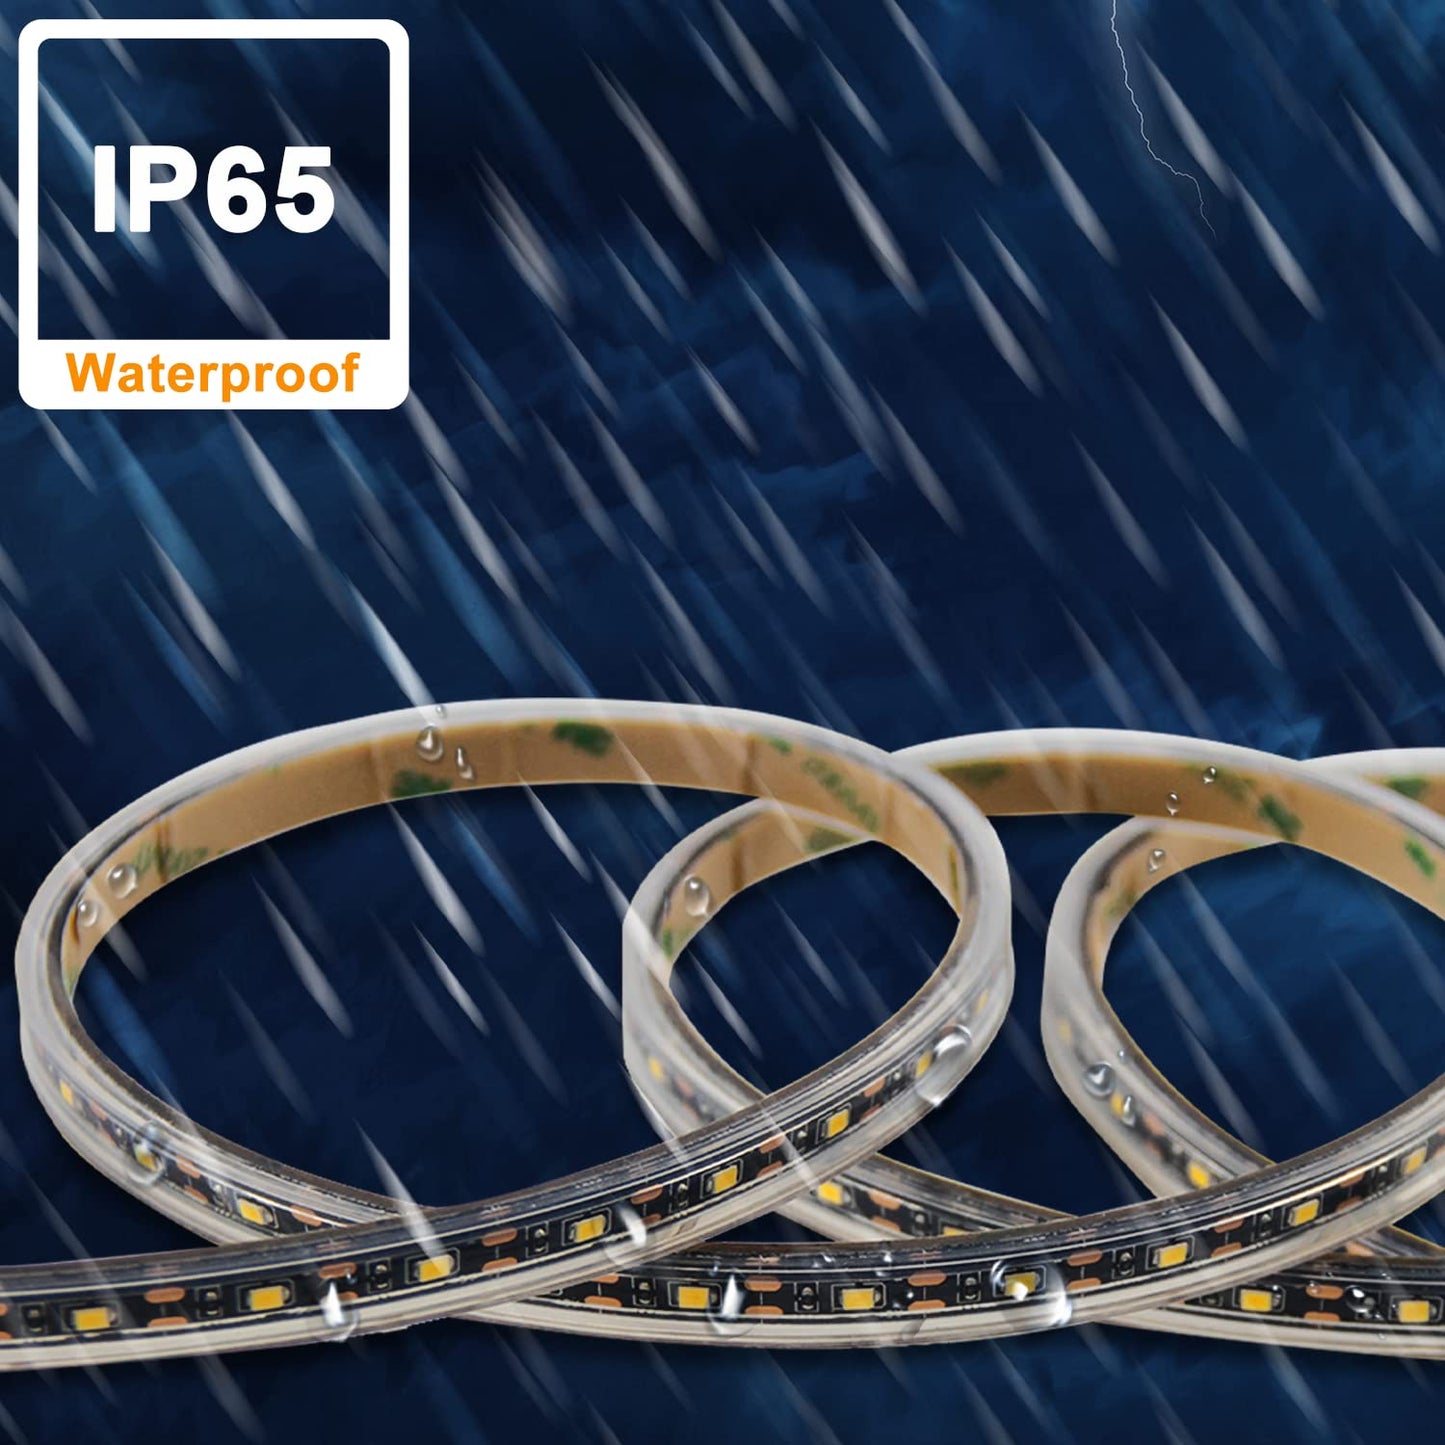 Send an inquiry for Battery Operated LED Strip Lights IP65 Waterproof Flexible Tape Light with PIR Motion Sensor for Outdoor 9.8Ft supplier. Wholesale Battery Operated LED Strip Lights directly from China Tape Light manufacturers/exporters. Get factory sale price list and become a distributor/agent-vstled.com